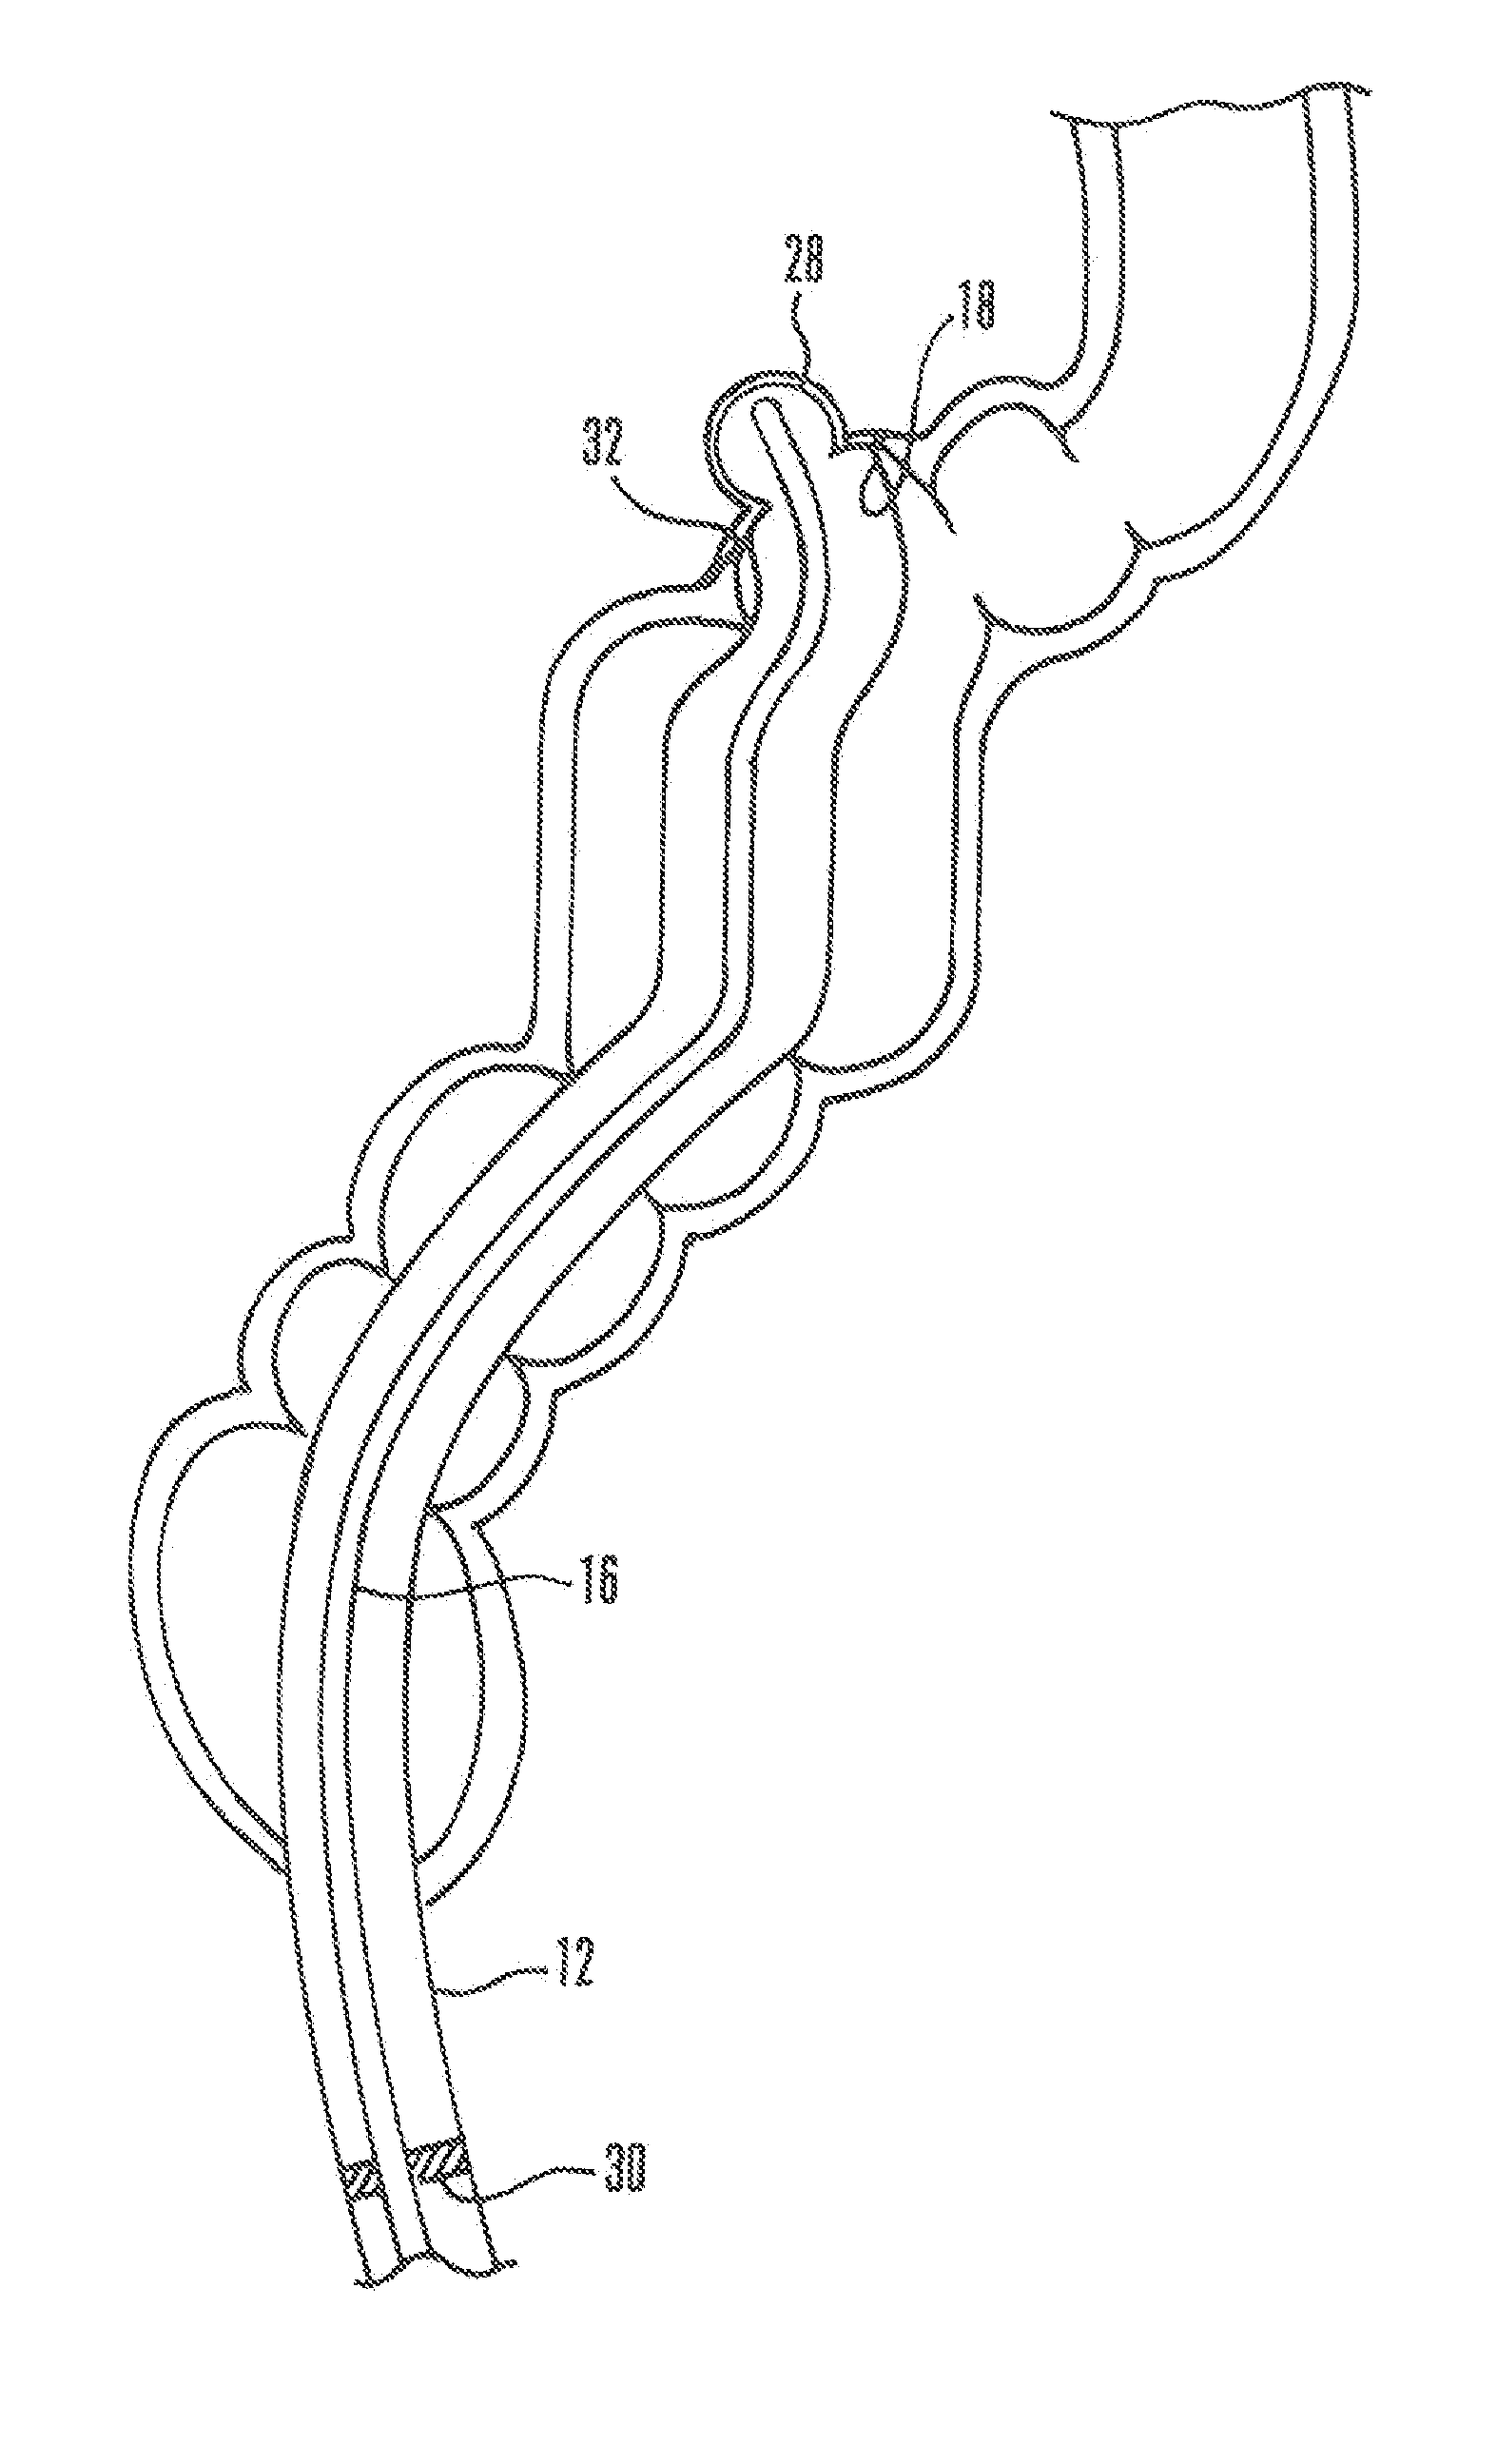 Systems and methods for endoscopic inversion and removal of diverticula